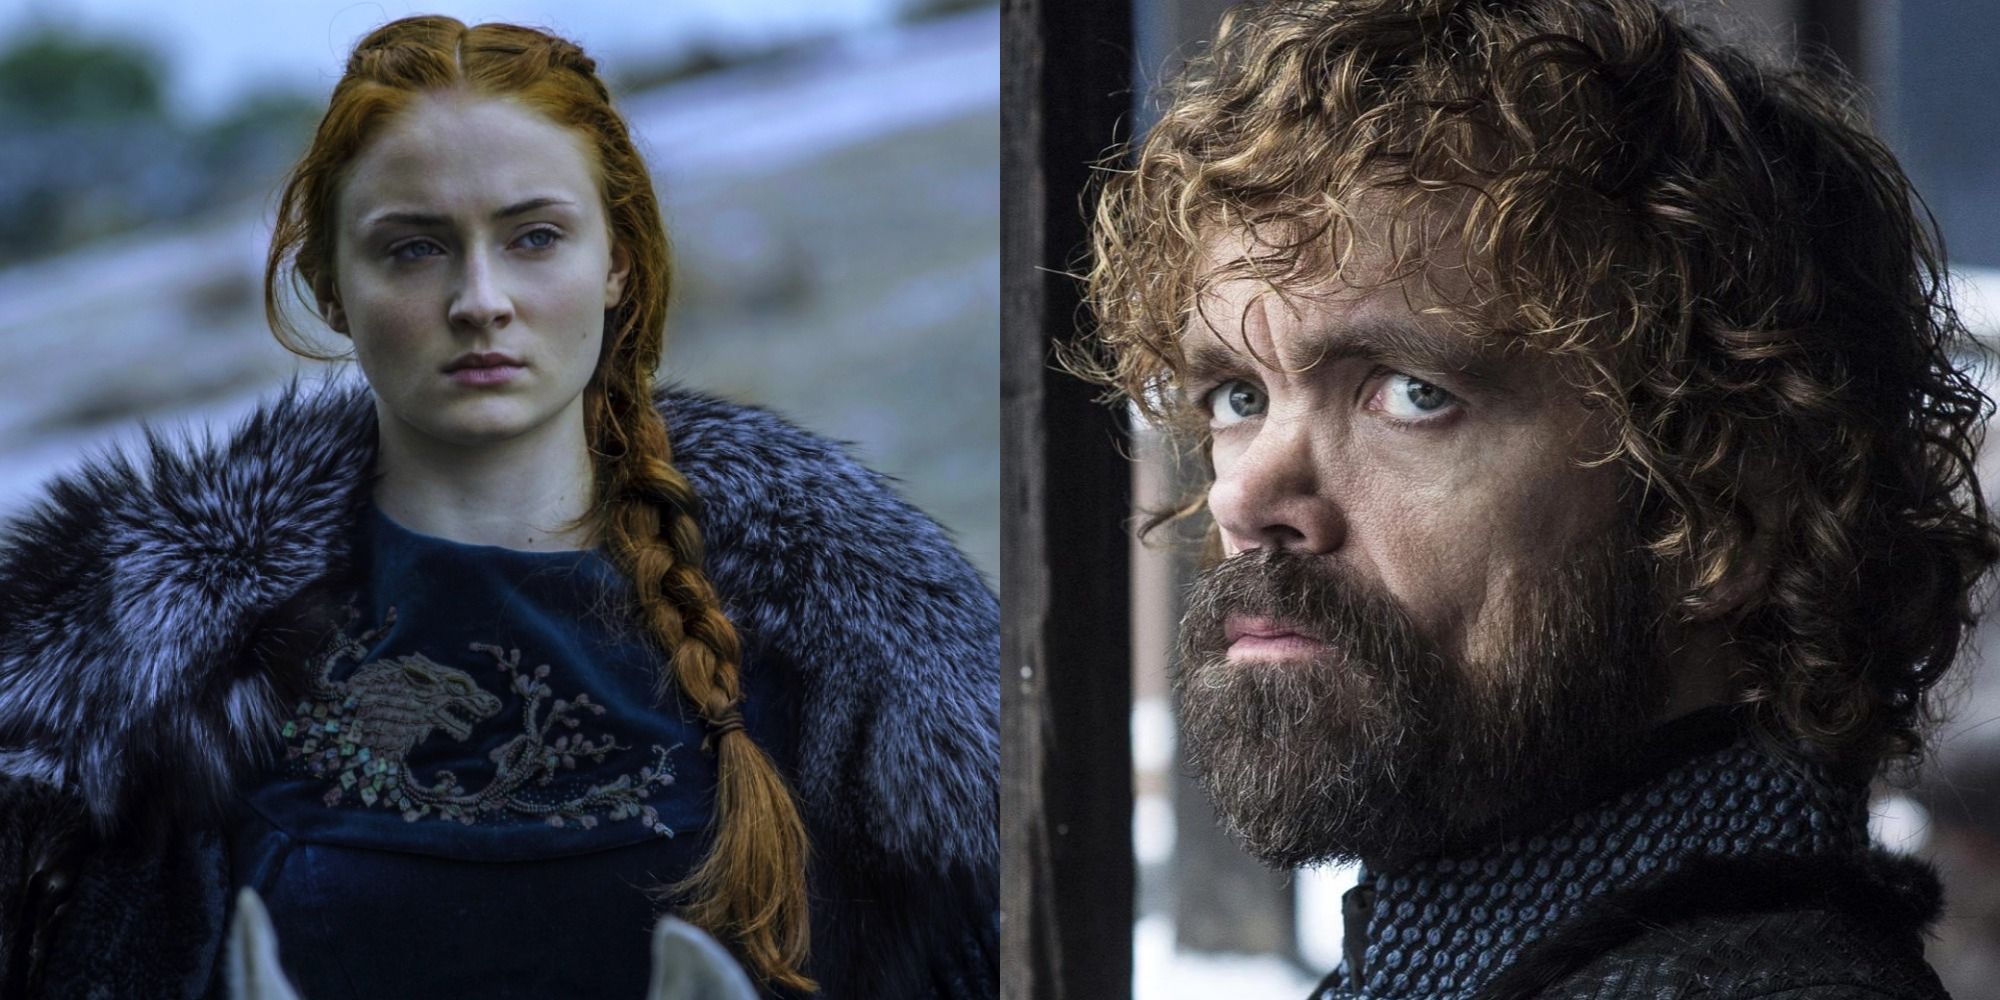 Split image of Sansa Stark and Tyrion Lannister in Game of Thrones